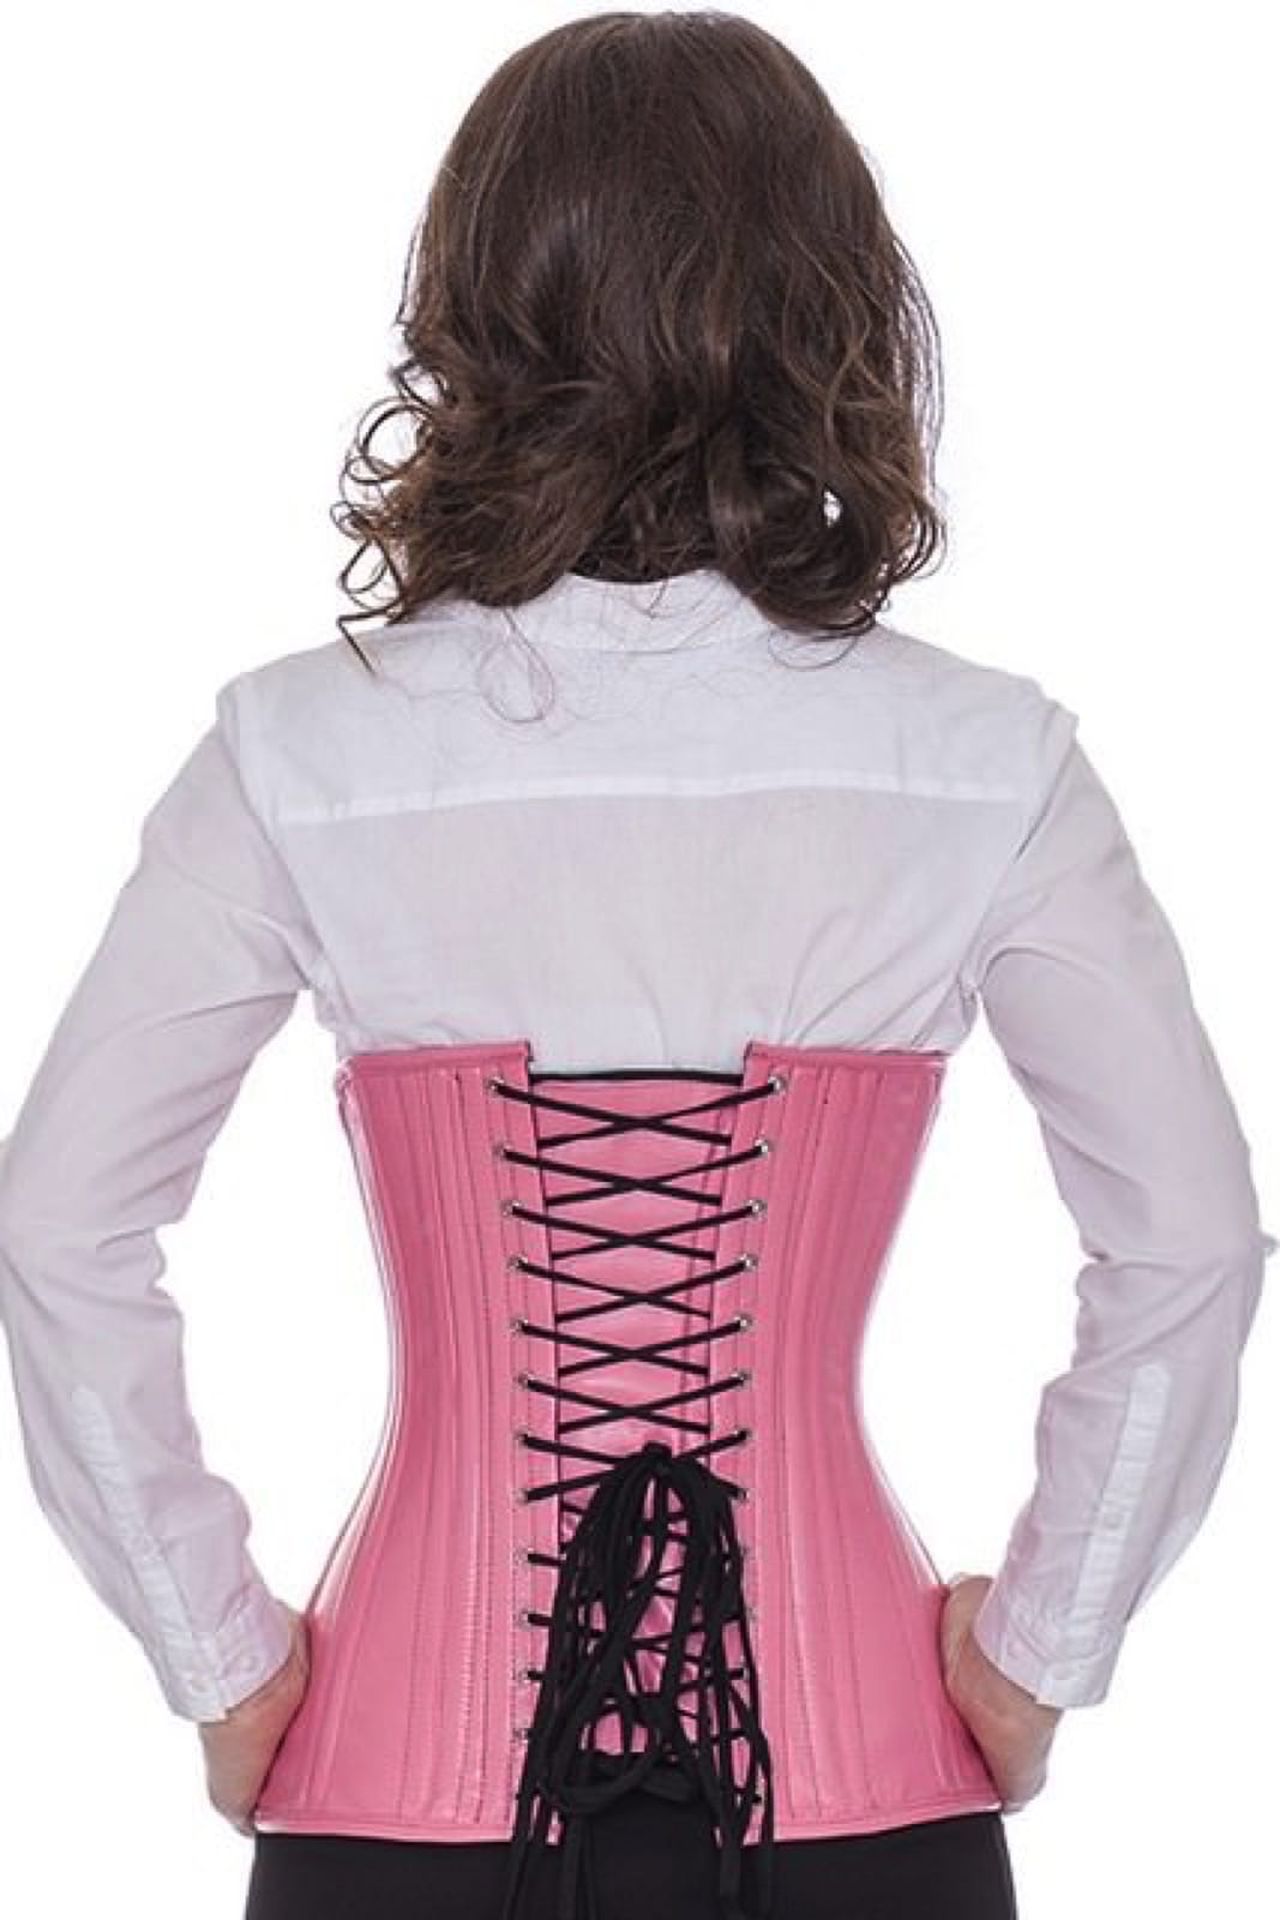 Corset pink leather curved underbust ln22